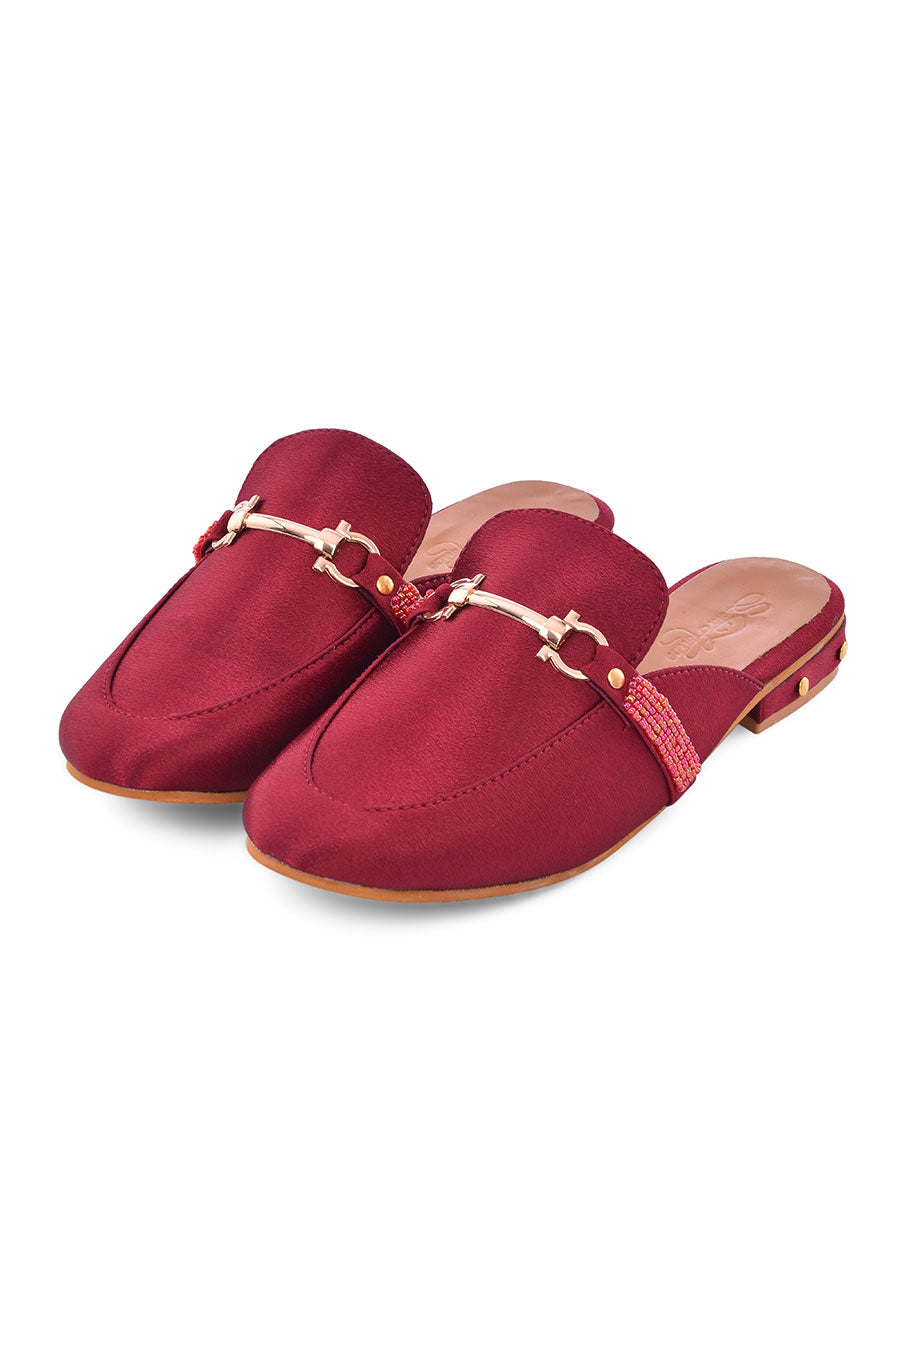 Gem Stone Maroon Loafers